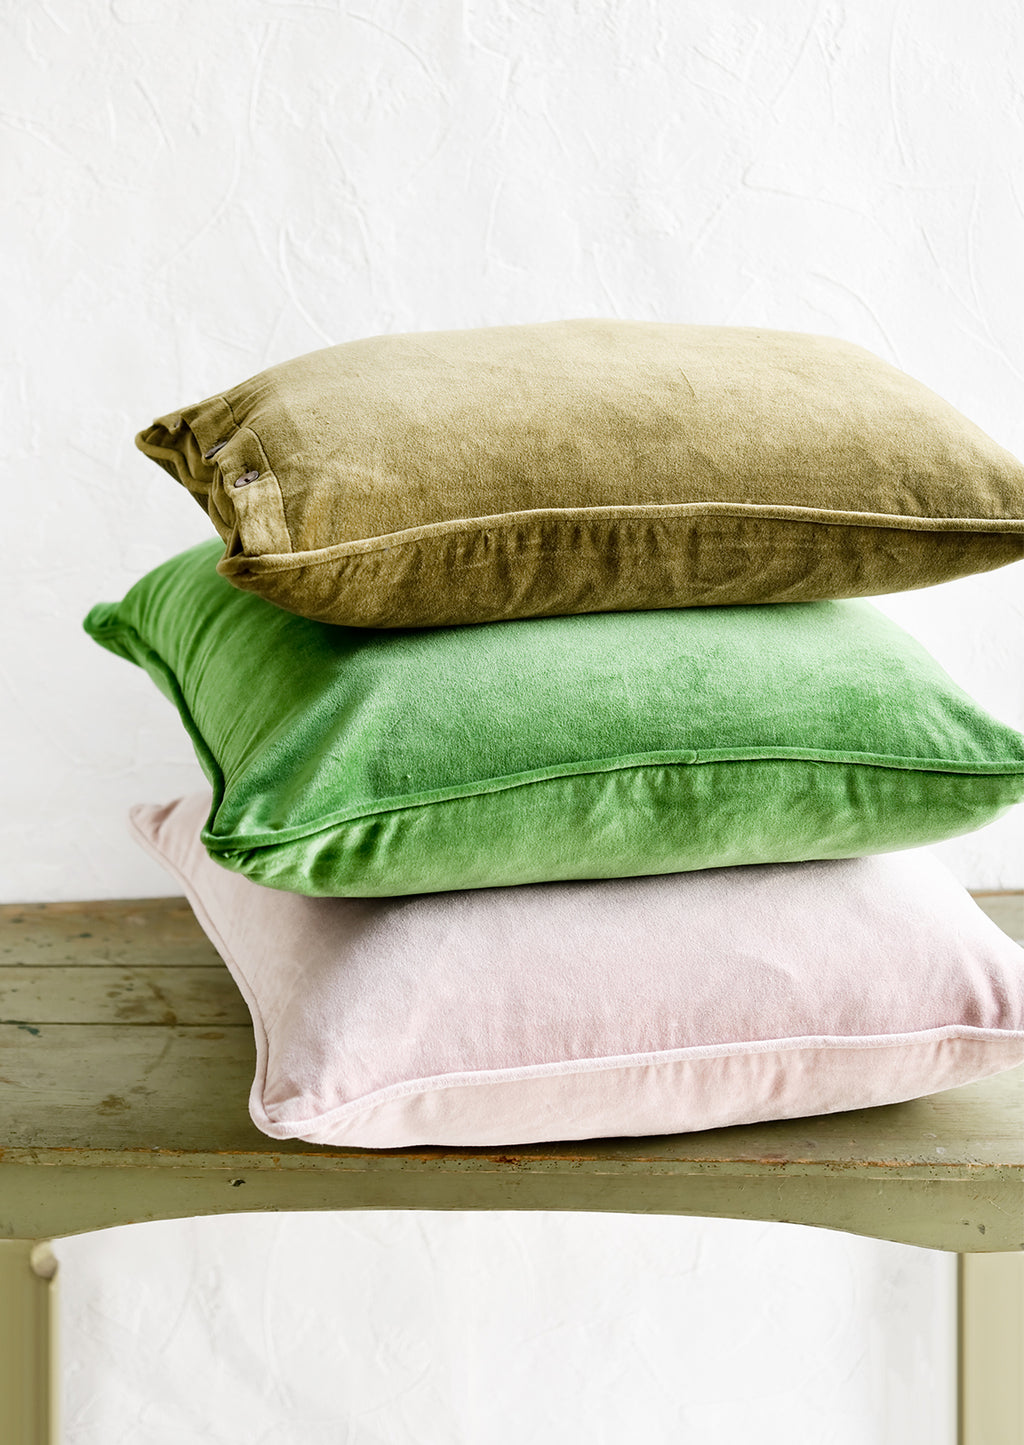 3: A stack of velvet pillows in green and pink.